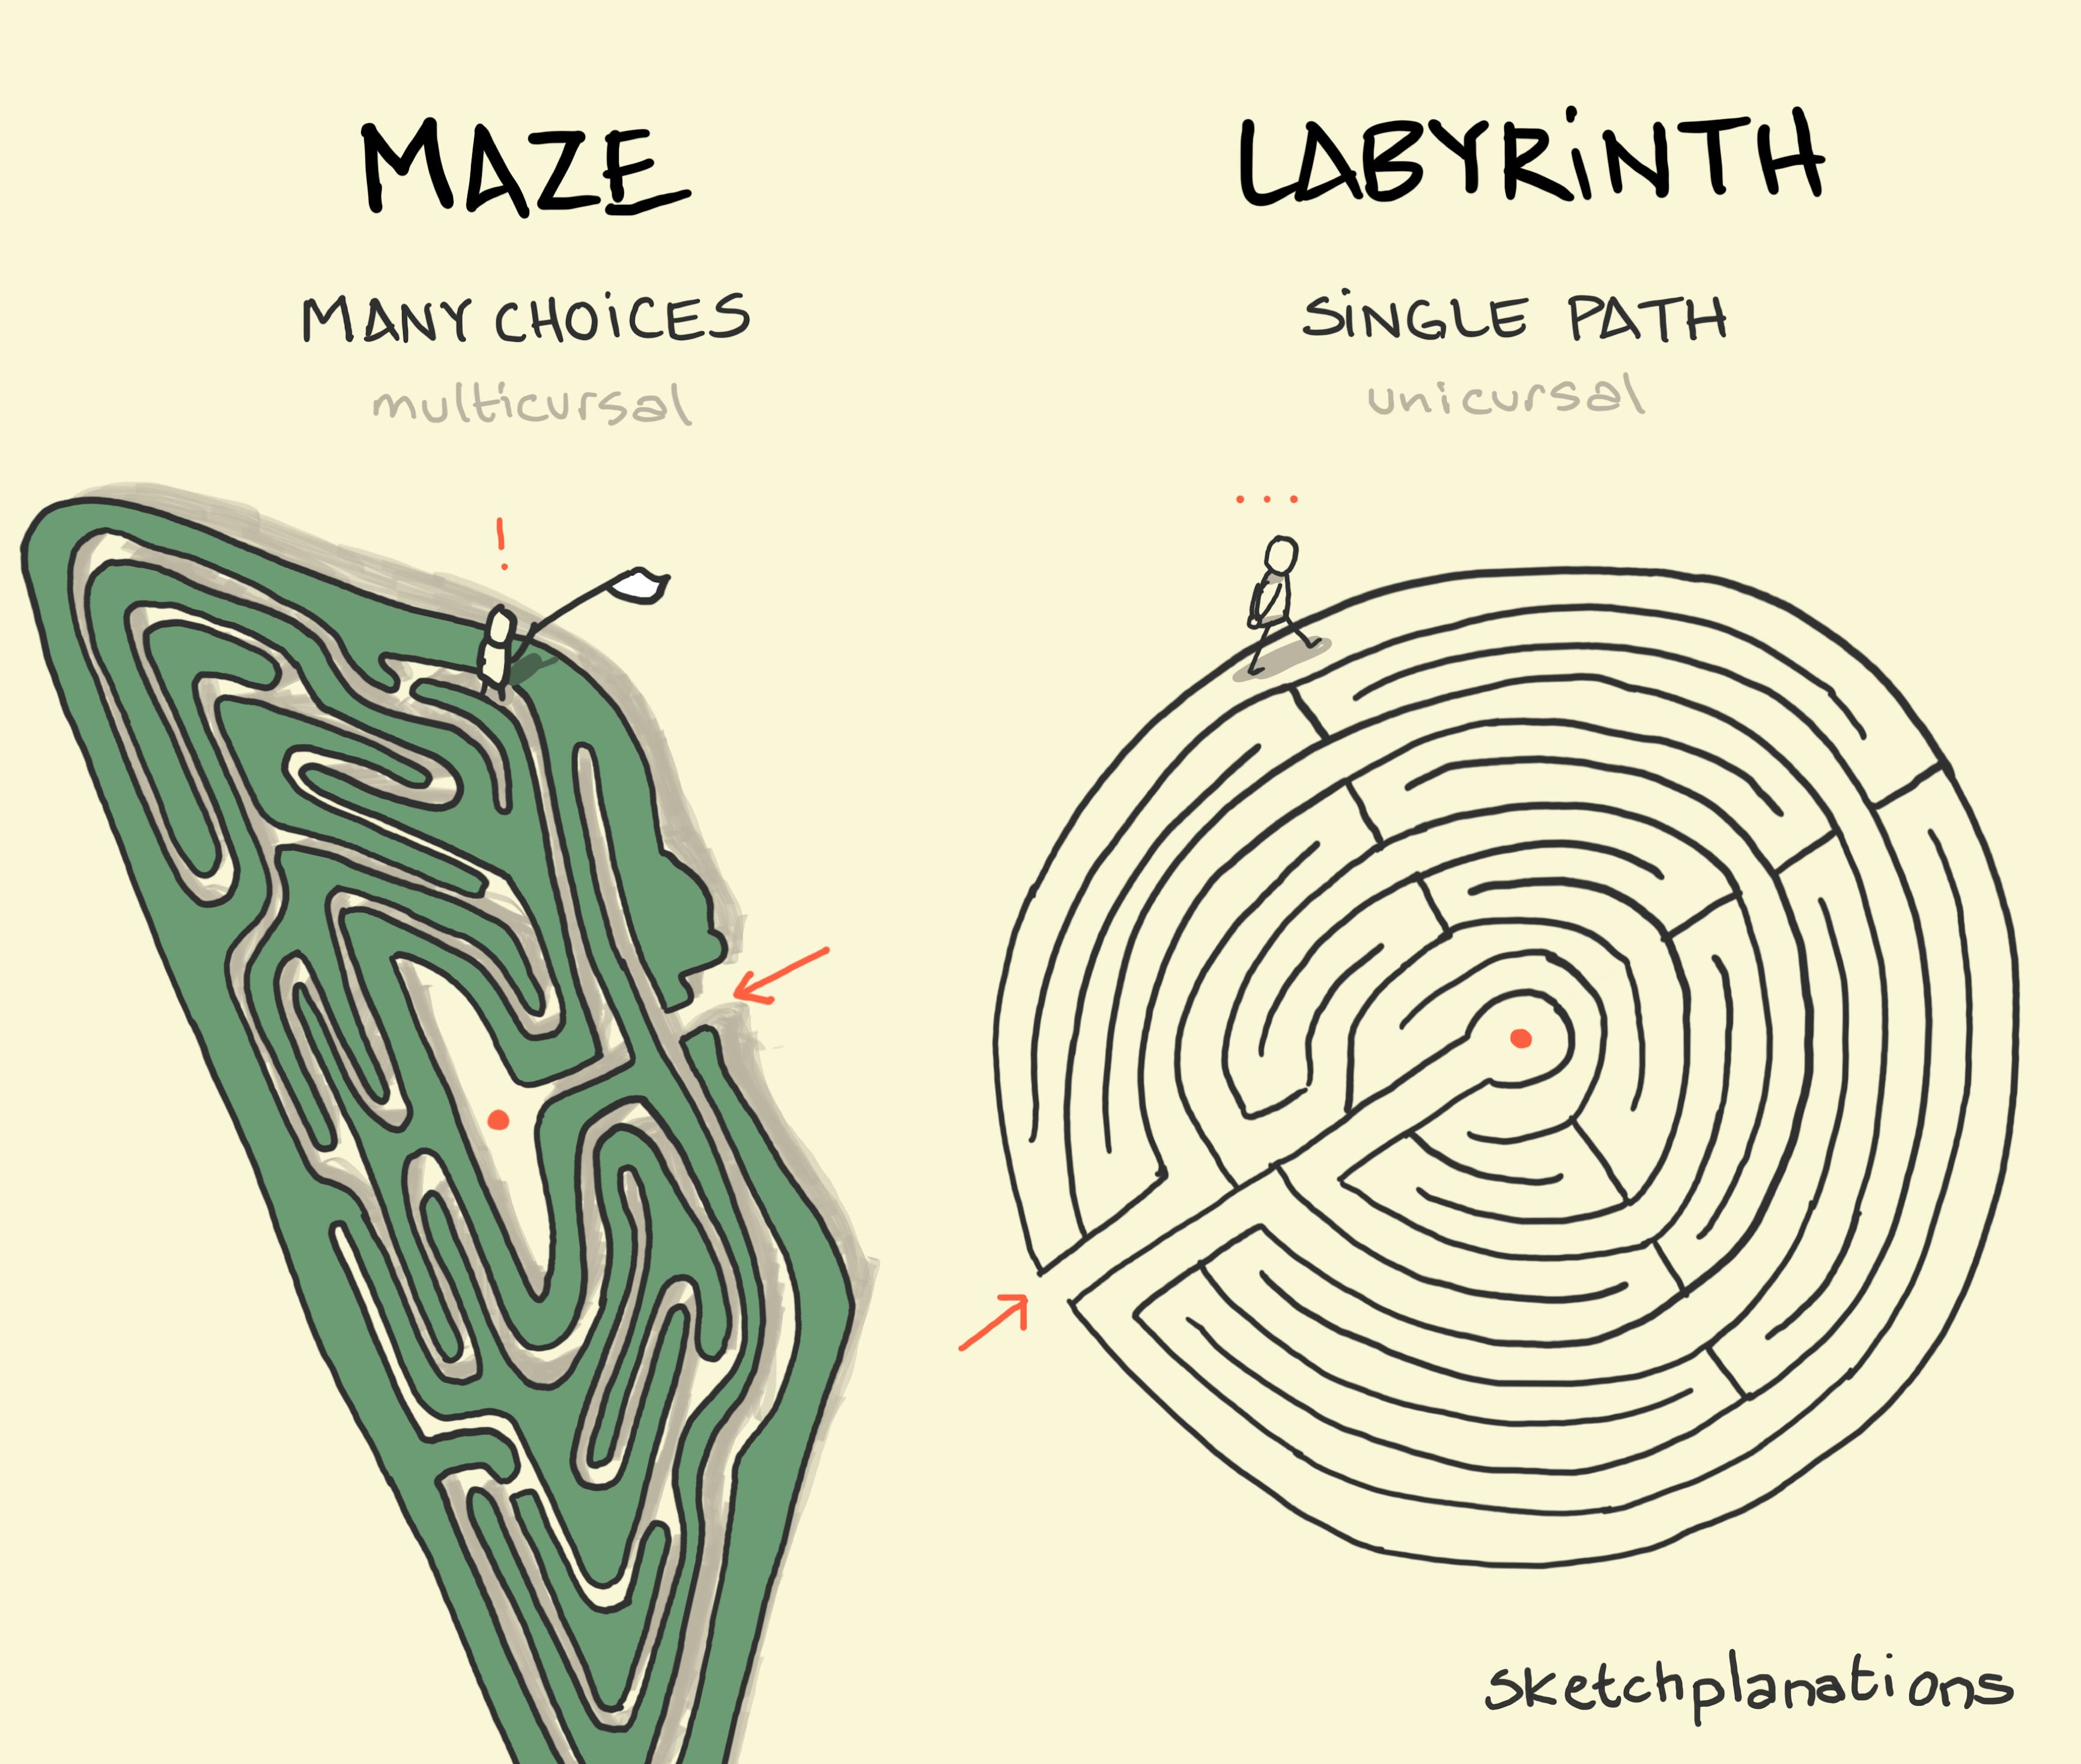 Labyrinth maze: A person lost in a maze with many choices and a person thoughtfully walking through a labyrinth following the path inexorably and peacefully towards the centre 